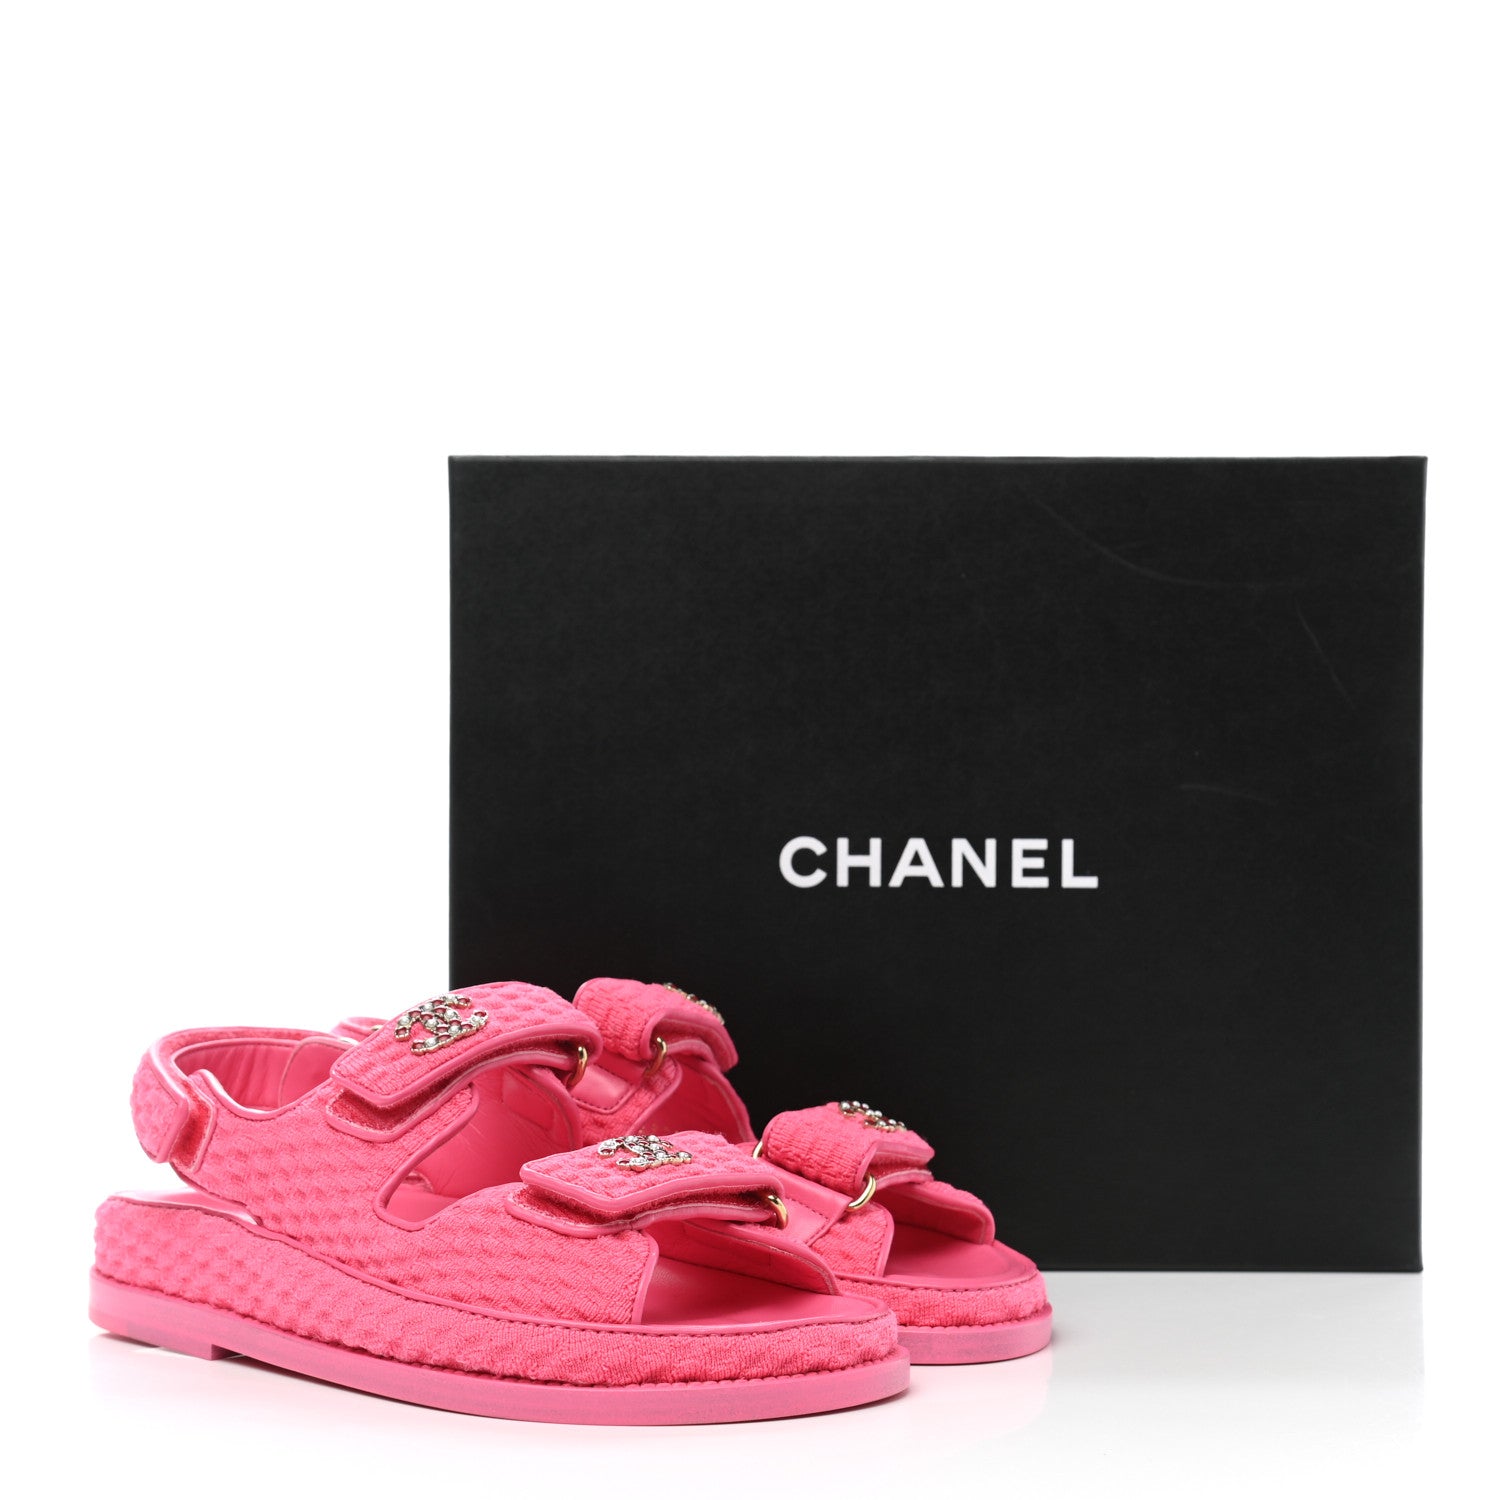 CHANEL Bow Sandals for Women for sale